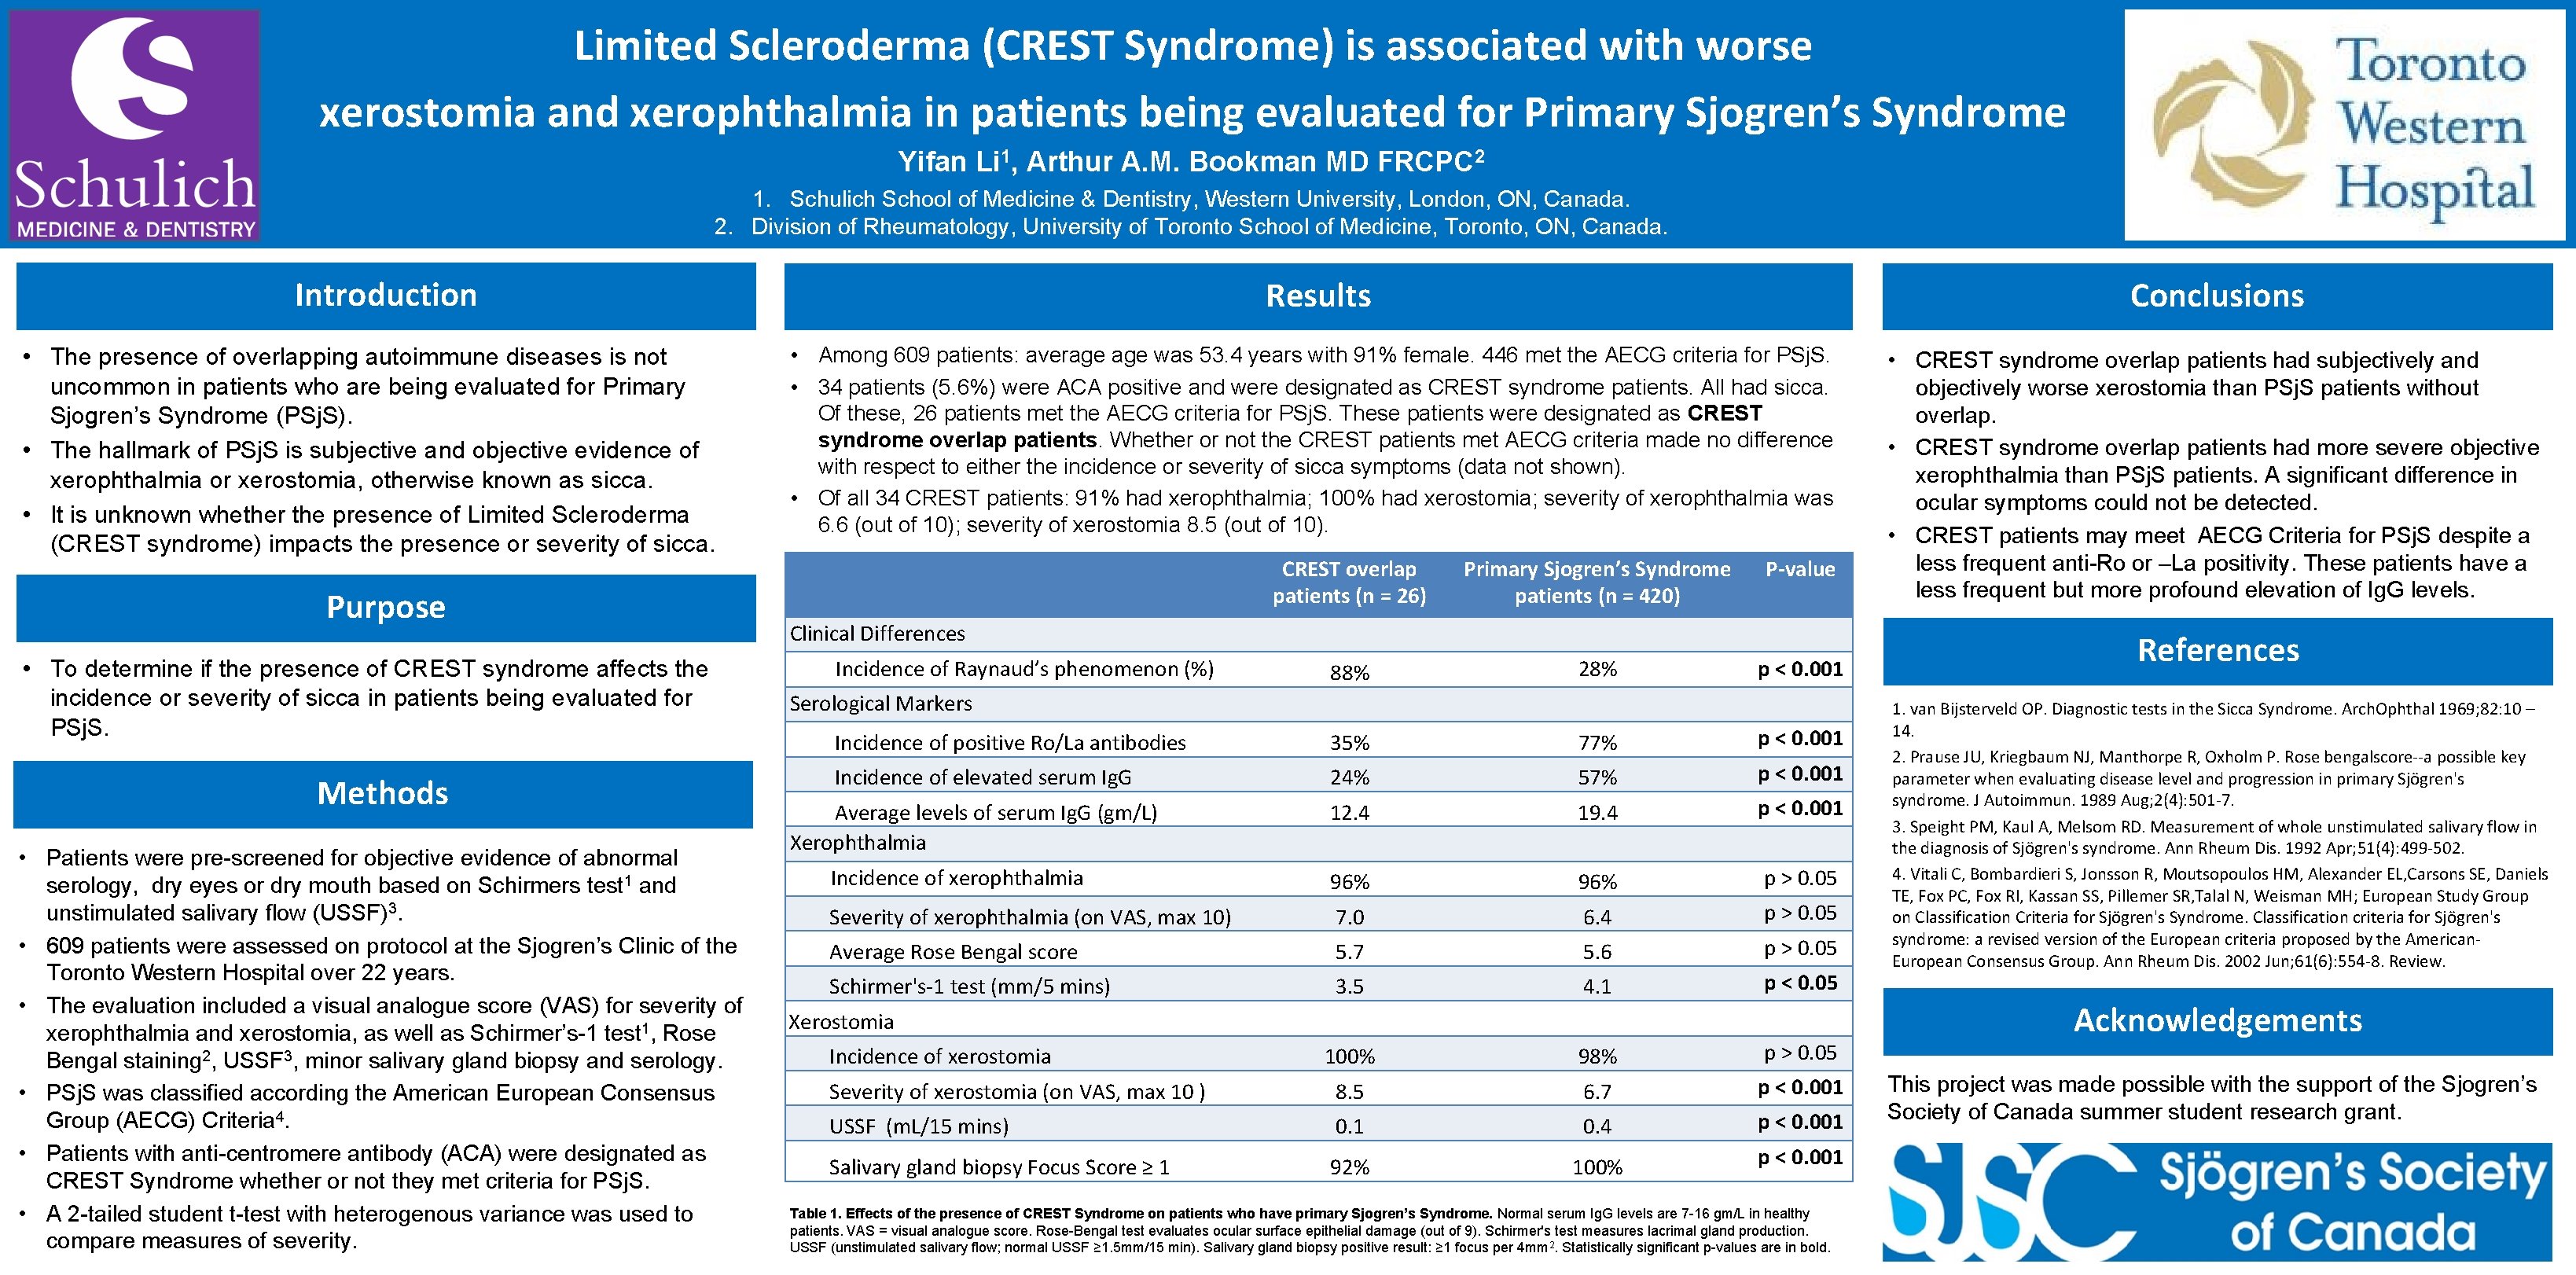 Limited Scleroderma (CREST Syndrome) is associated with worse xerostomia and xerophthalmia in patients being